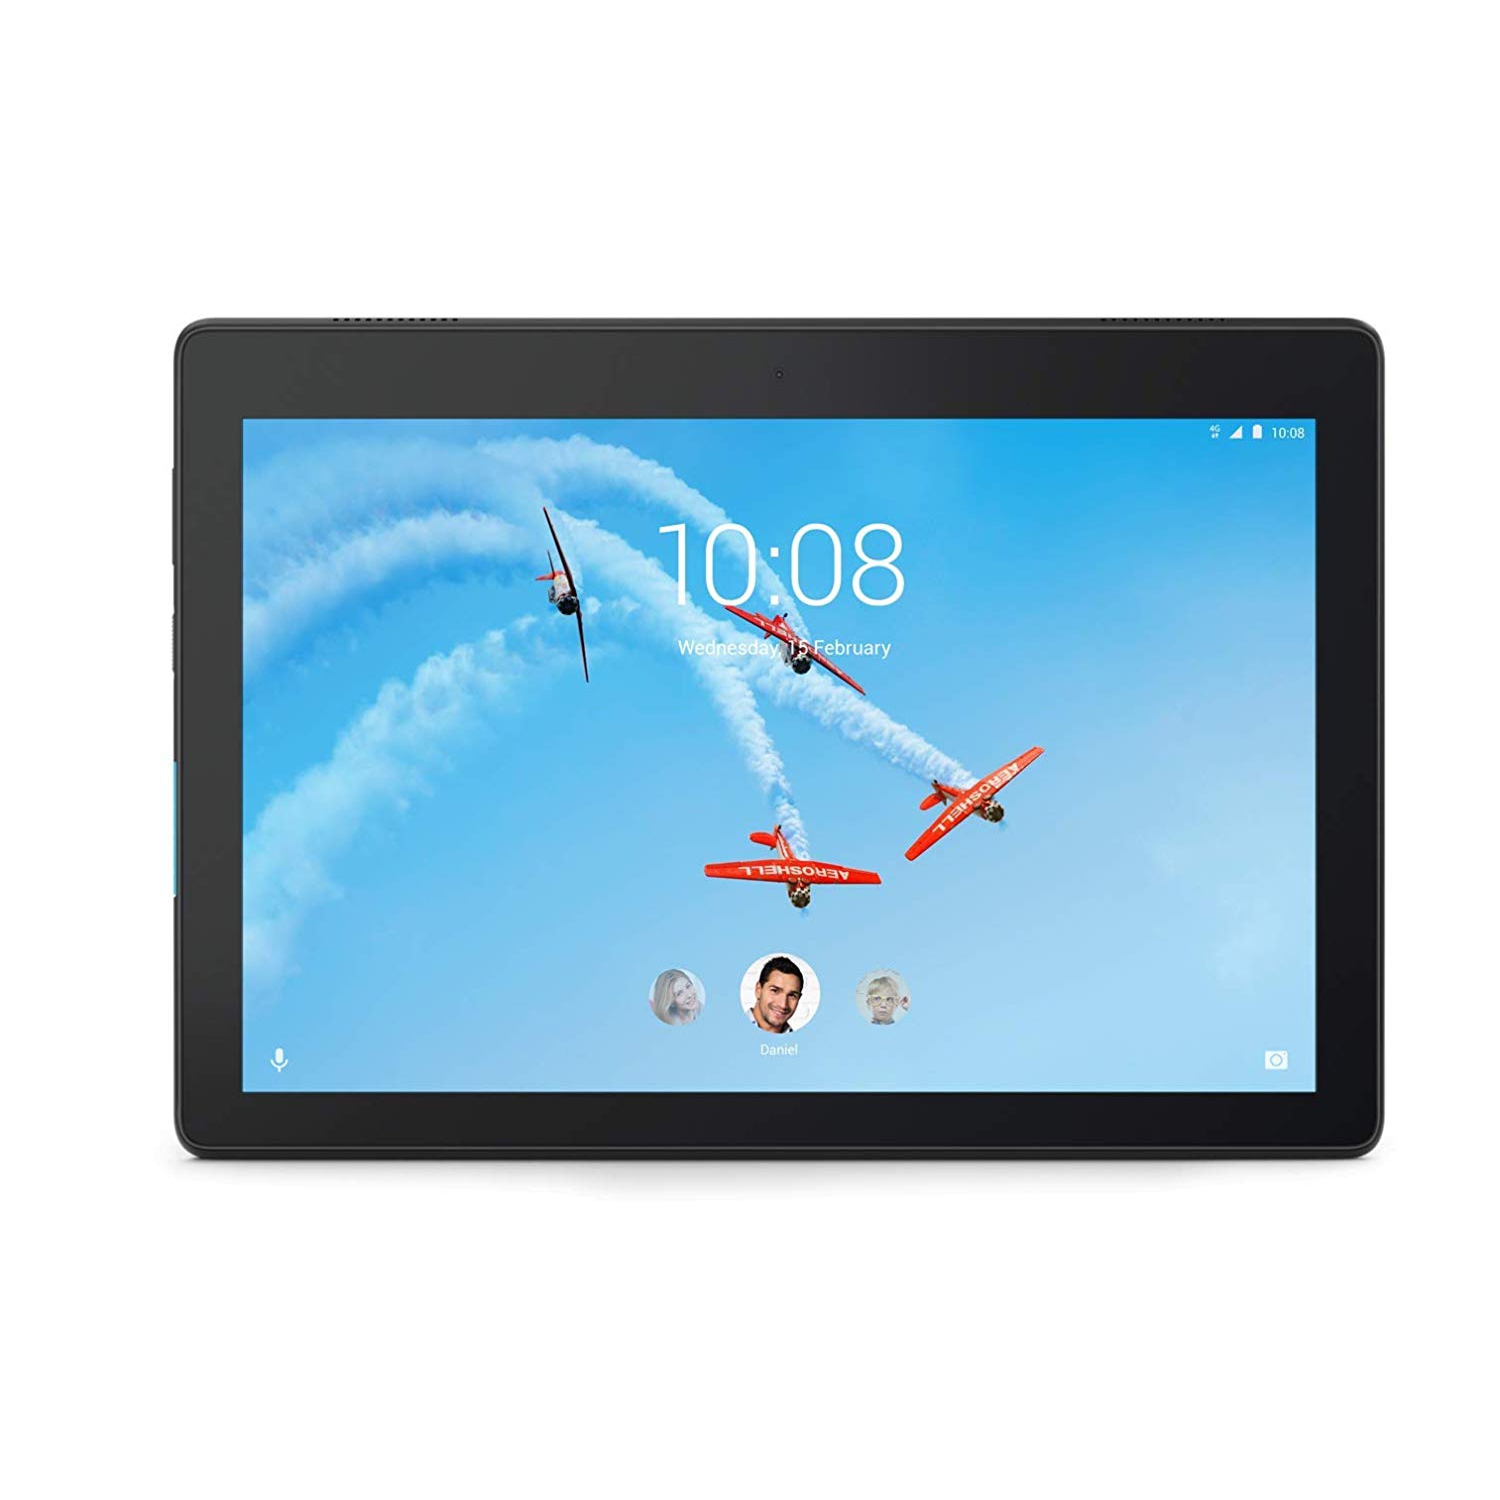 Refurbished (Excellent) - Lenovo Tab E10 TB-X104F, 10.1" Android Tablet, 2GB RAM, 16GB Storage, Android 8.1 OS, Black